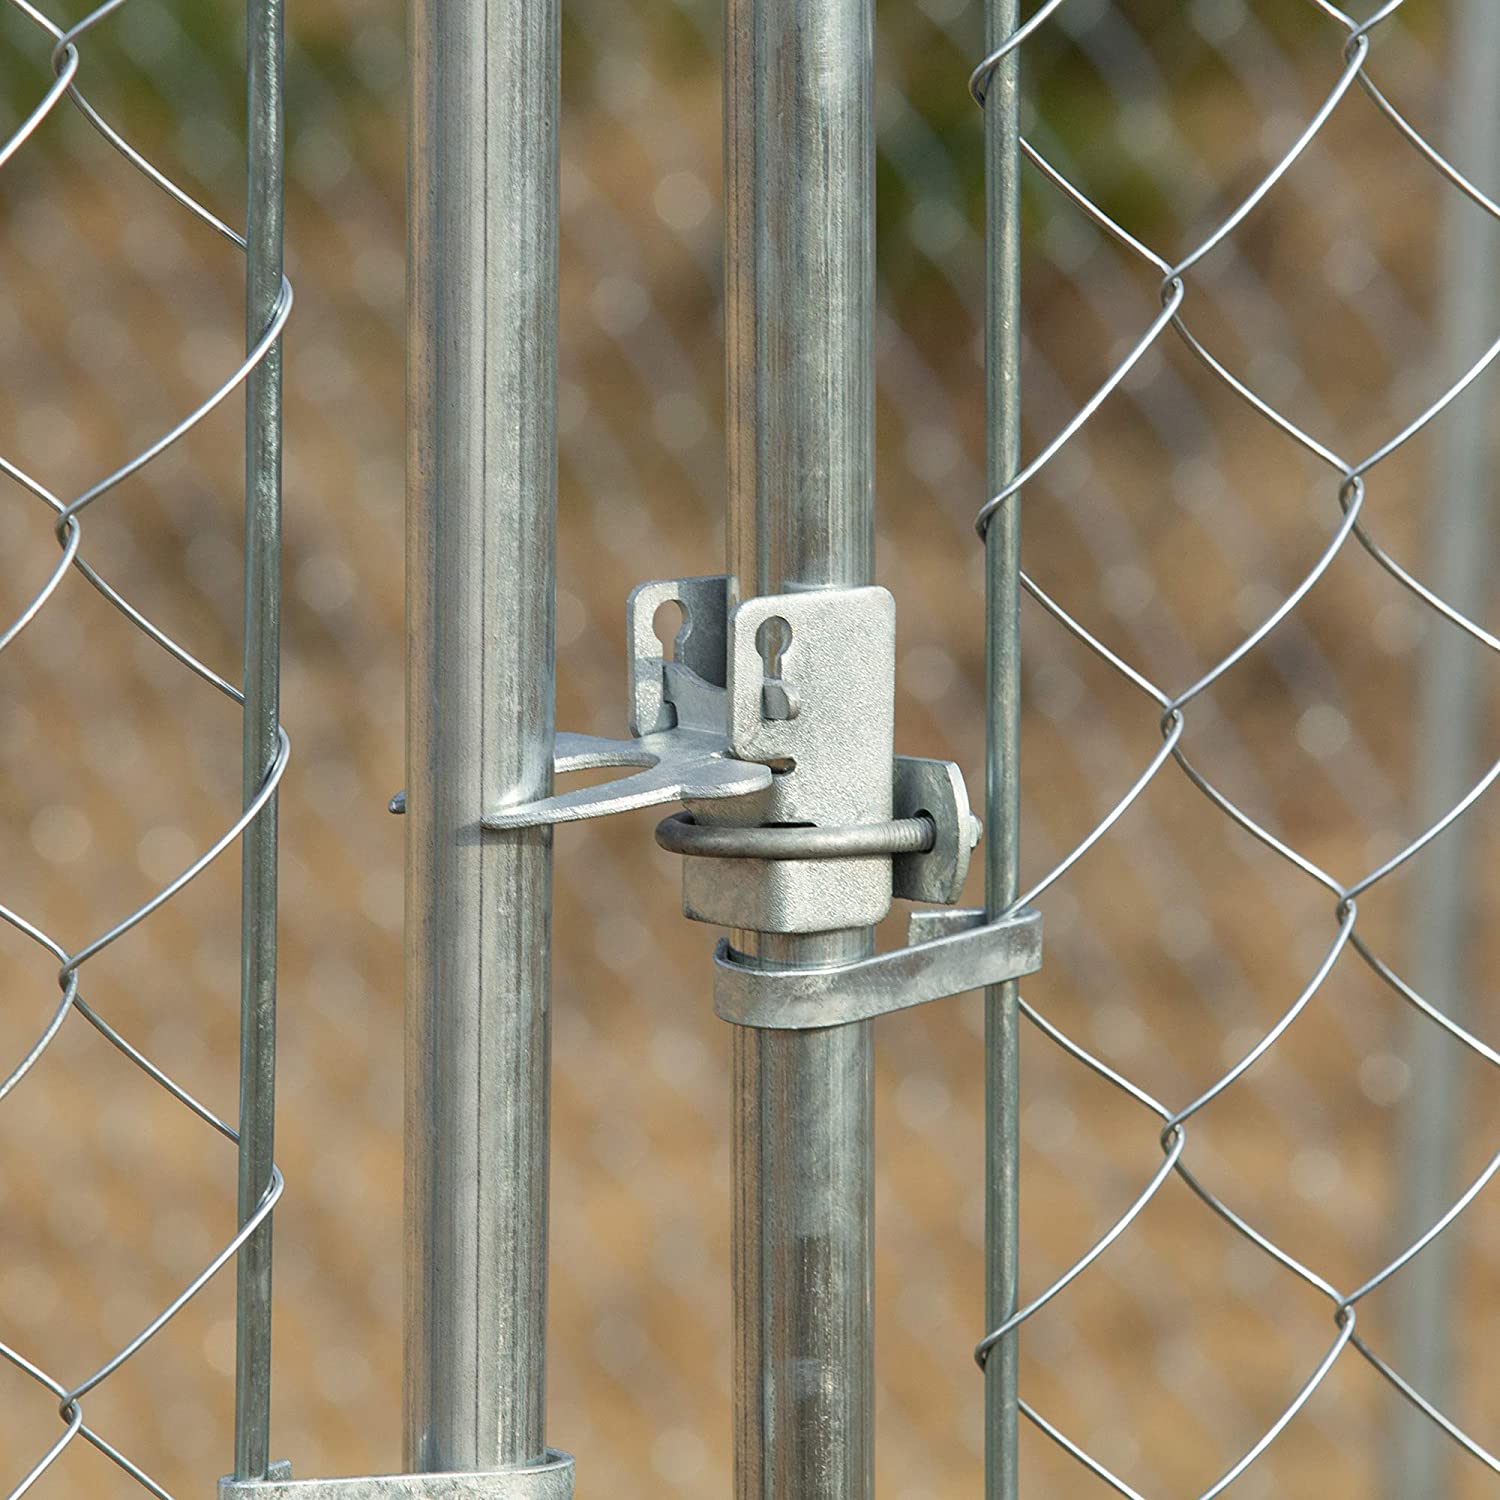 Knowledge introduction of chain link fence